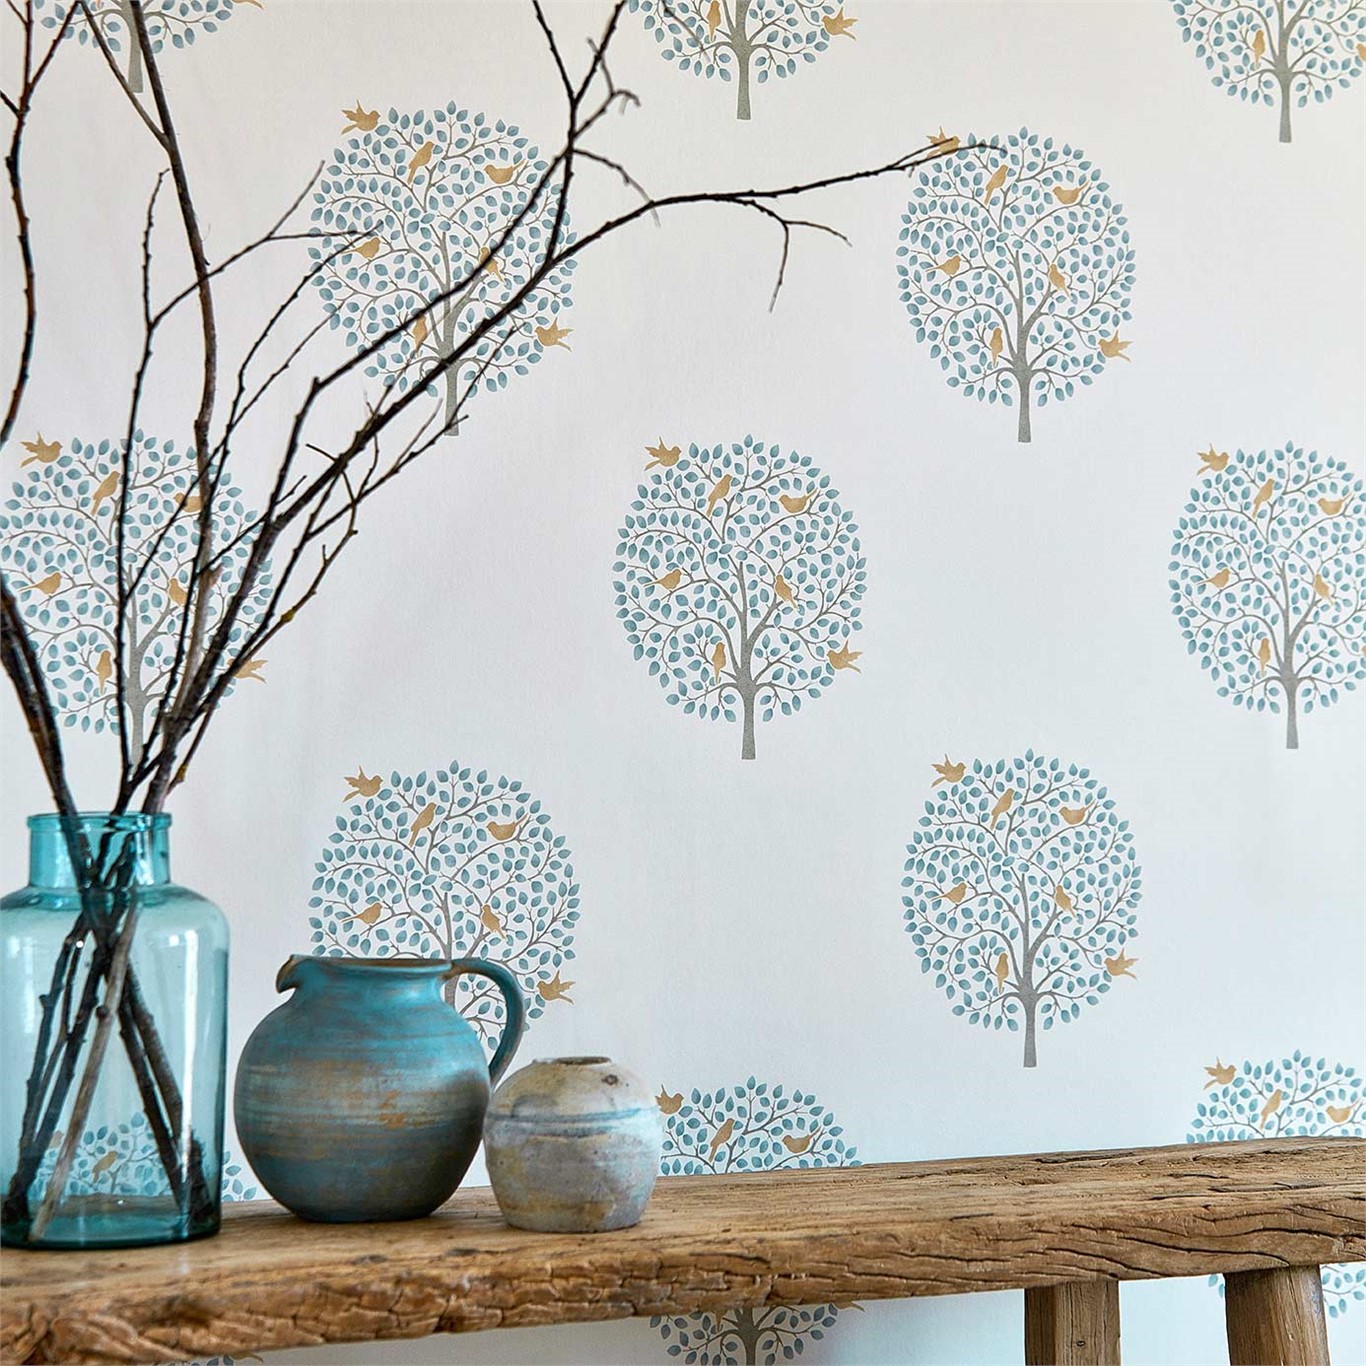 Bay Tree, A Wallpaper By Sanderson, Part Of The Potting - Sanderson Potting Room - HD Wallpaper 